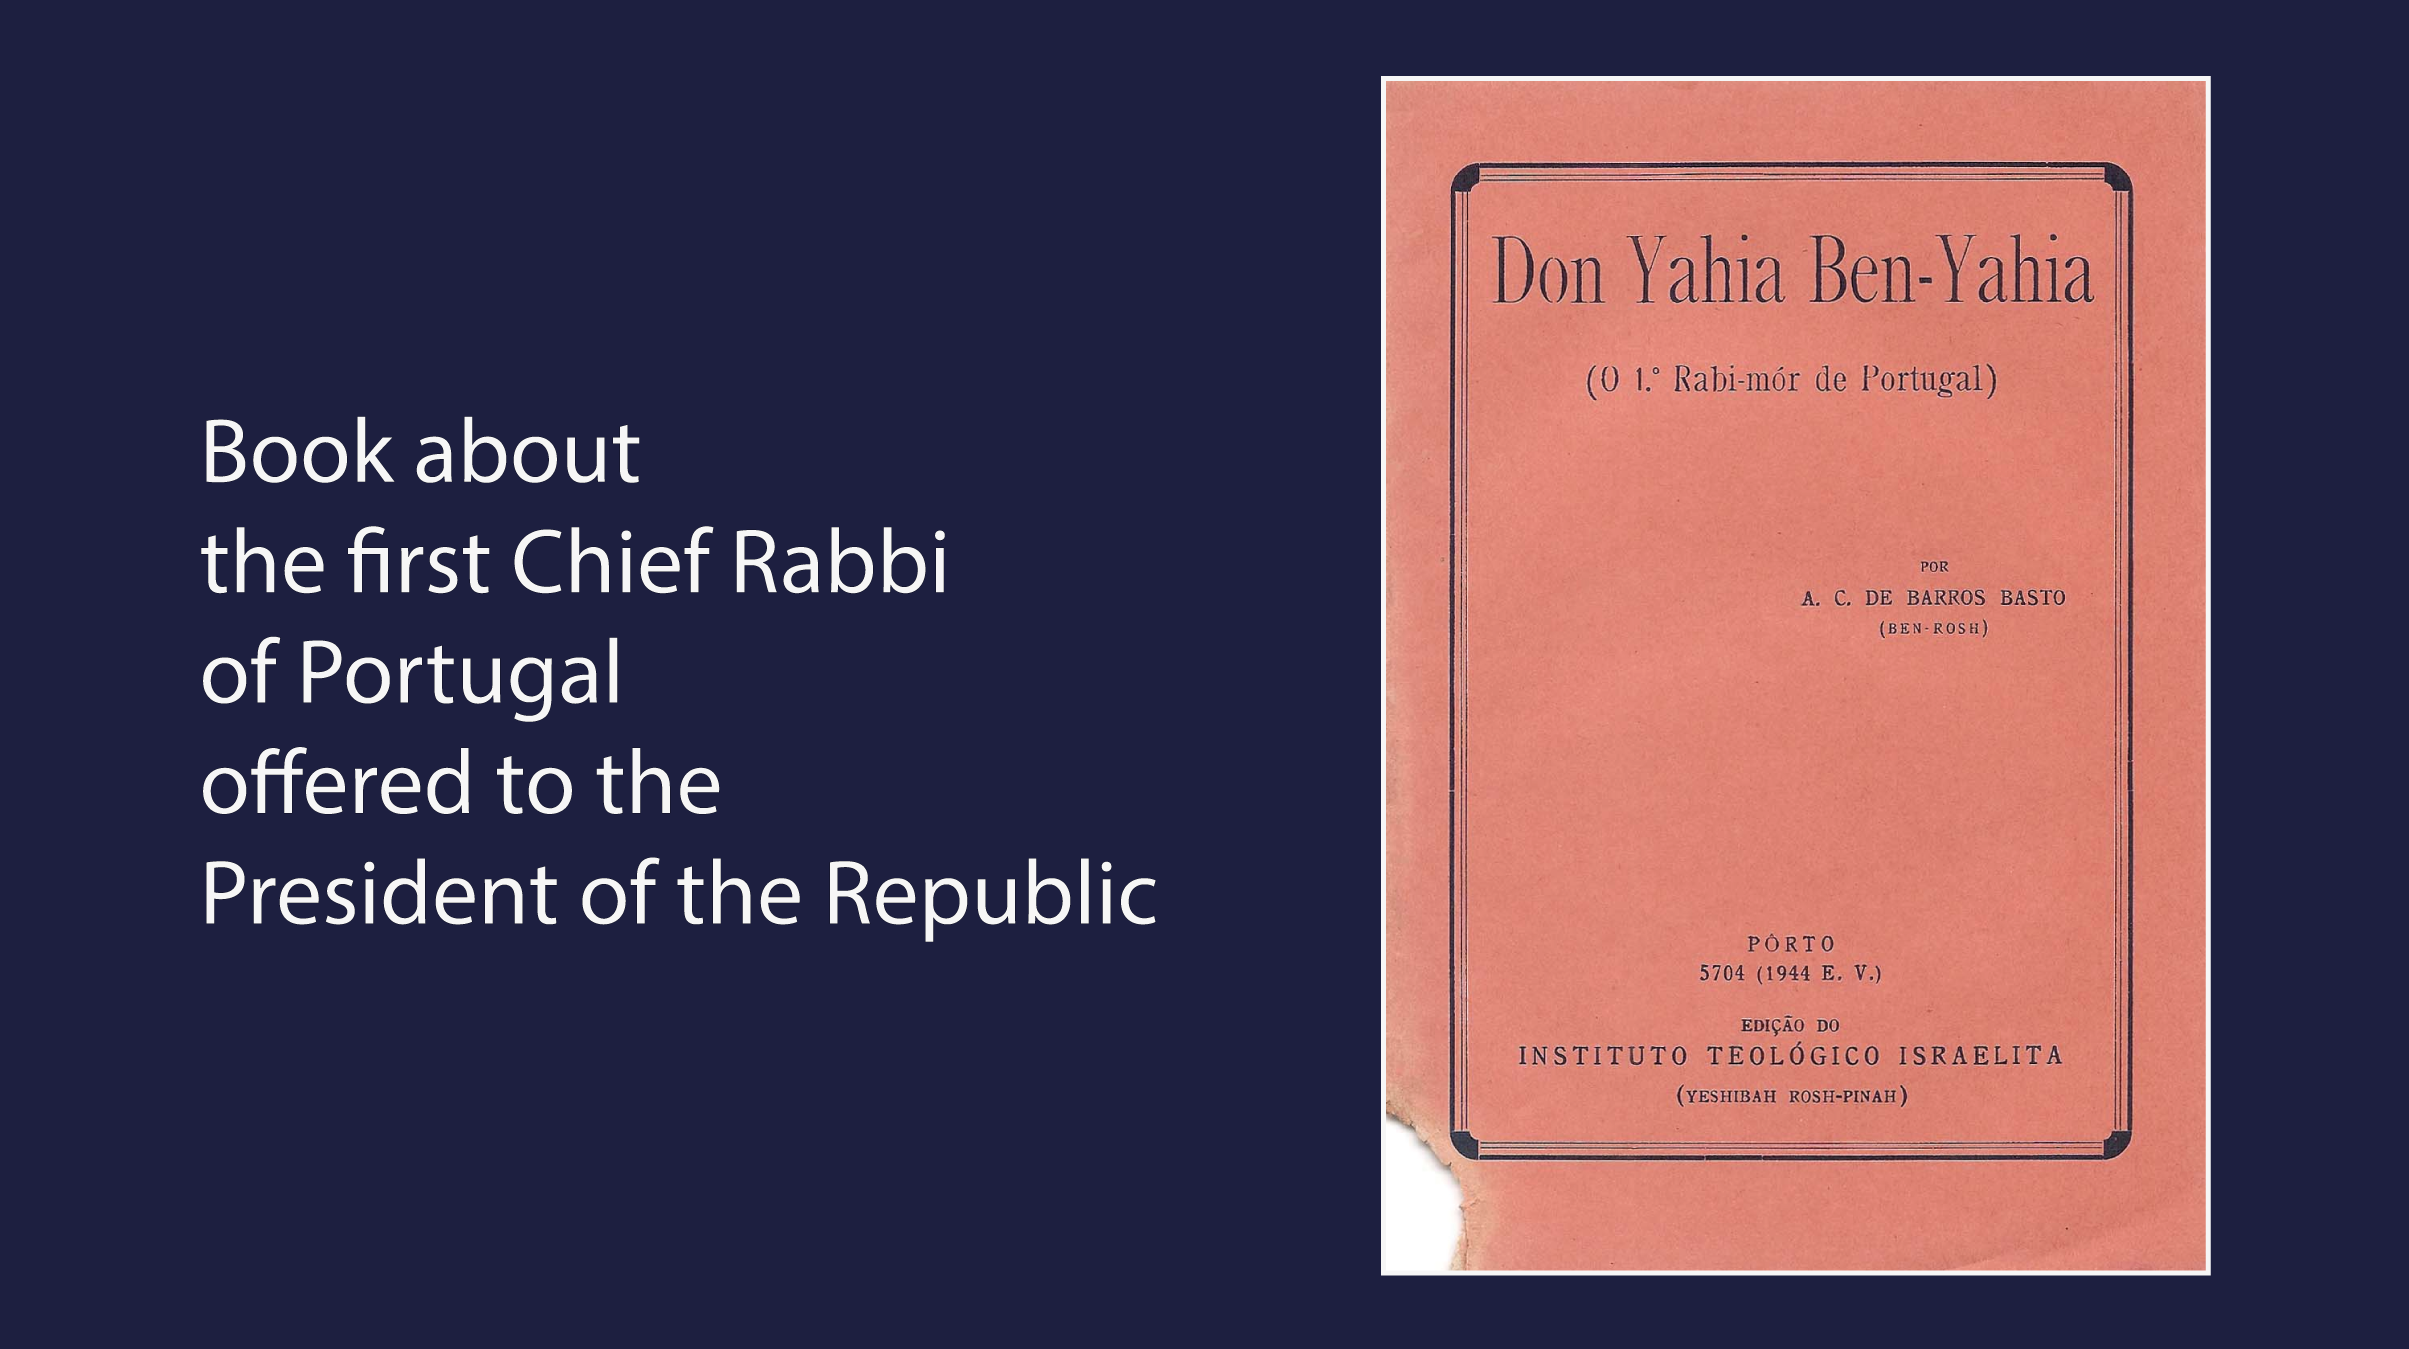 Book about the first Chief Rabbi of Portugal offered to the President of the Republic